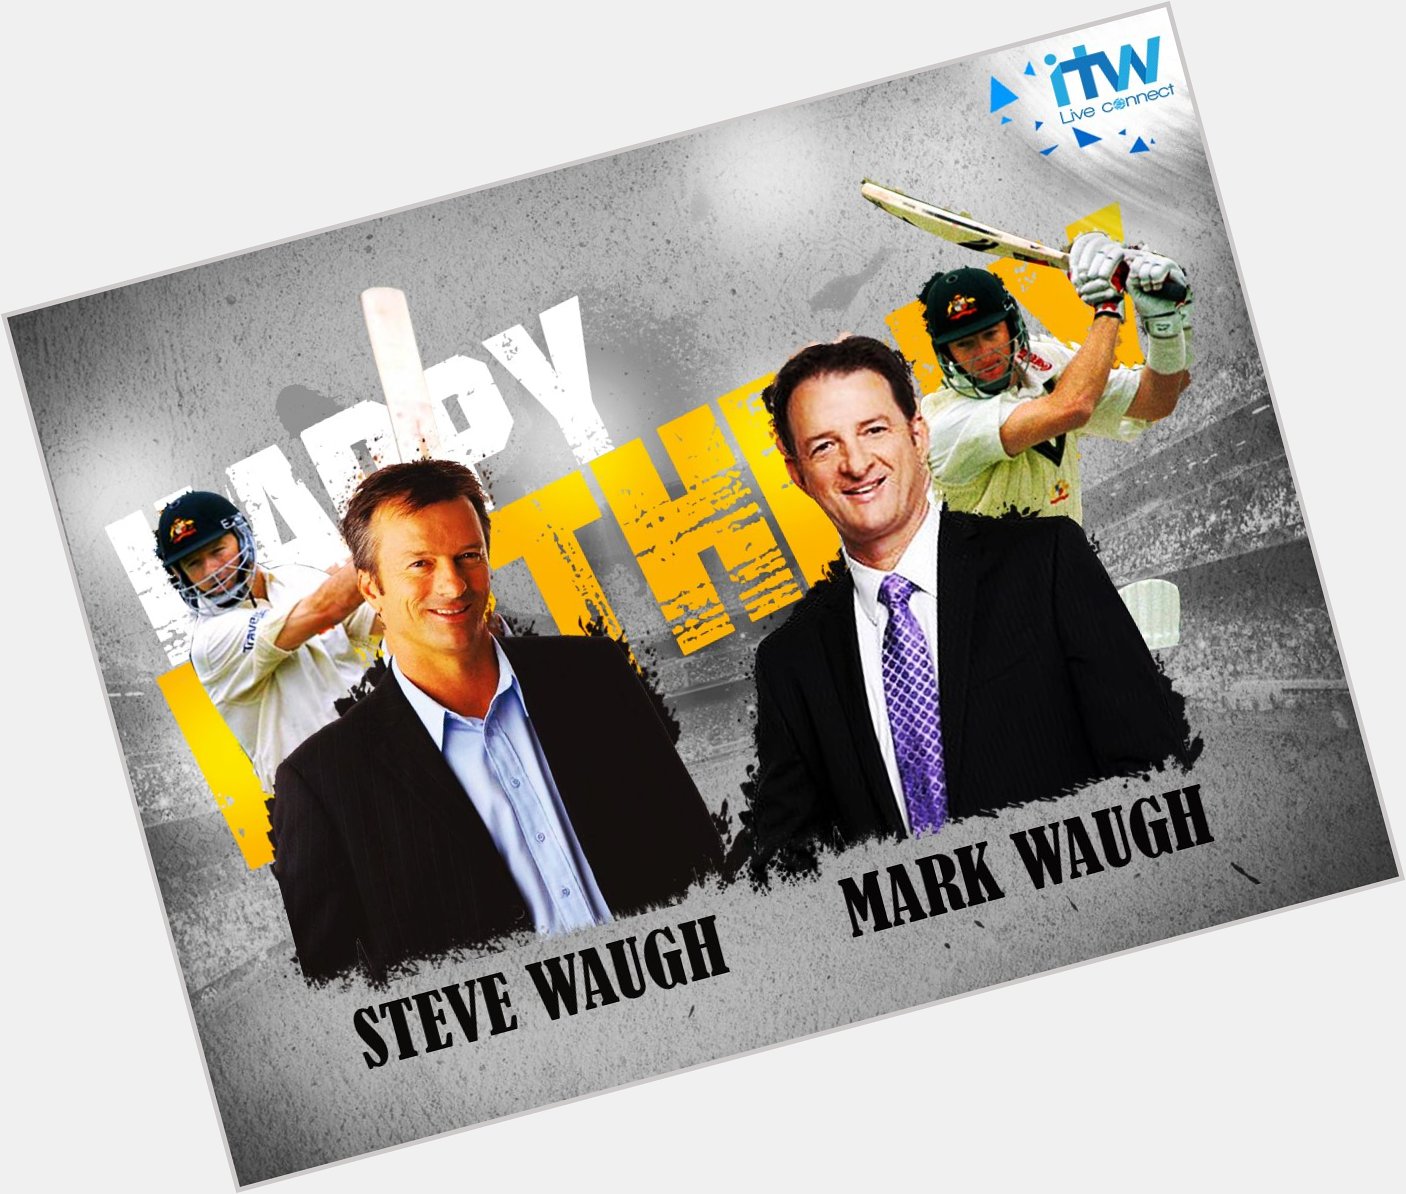  Happy Birthday Steve Waugh and Mark Waugh The first to play in a Test together, They turn 52 Today. 